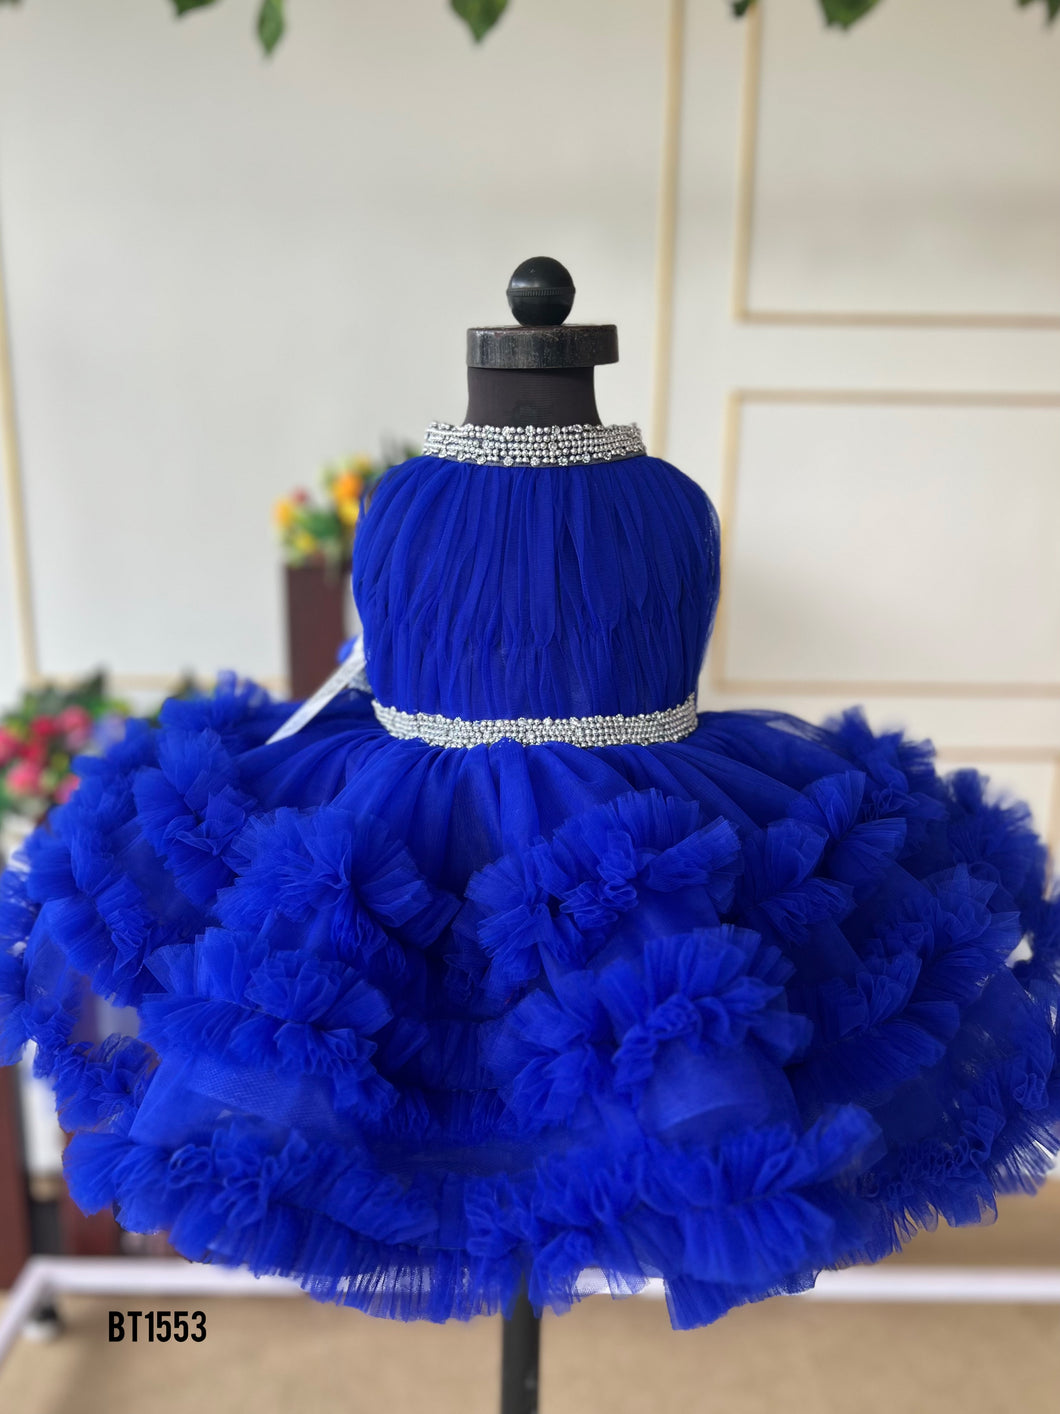 BT1553 Midnight Bloom: A Royal Blue Fantasy for Your Little Princess